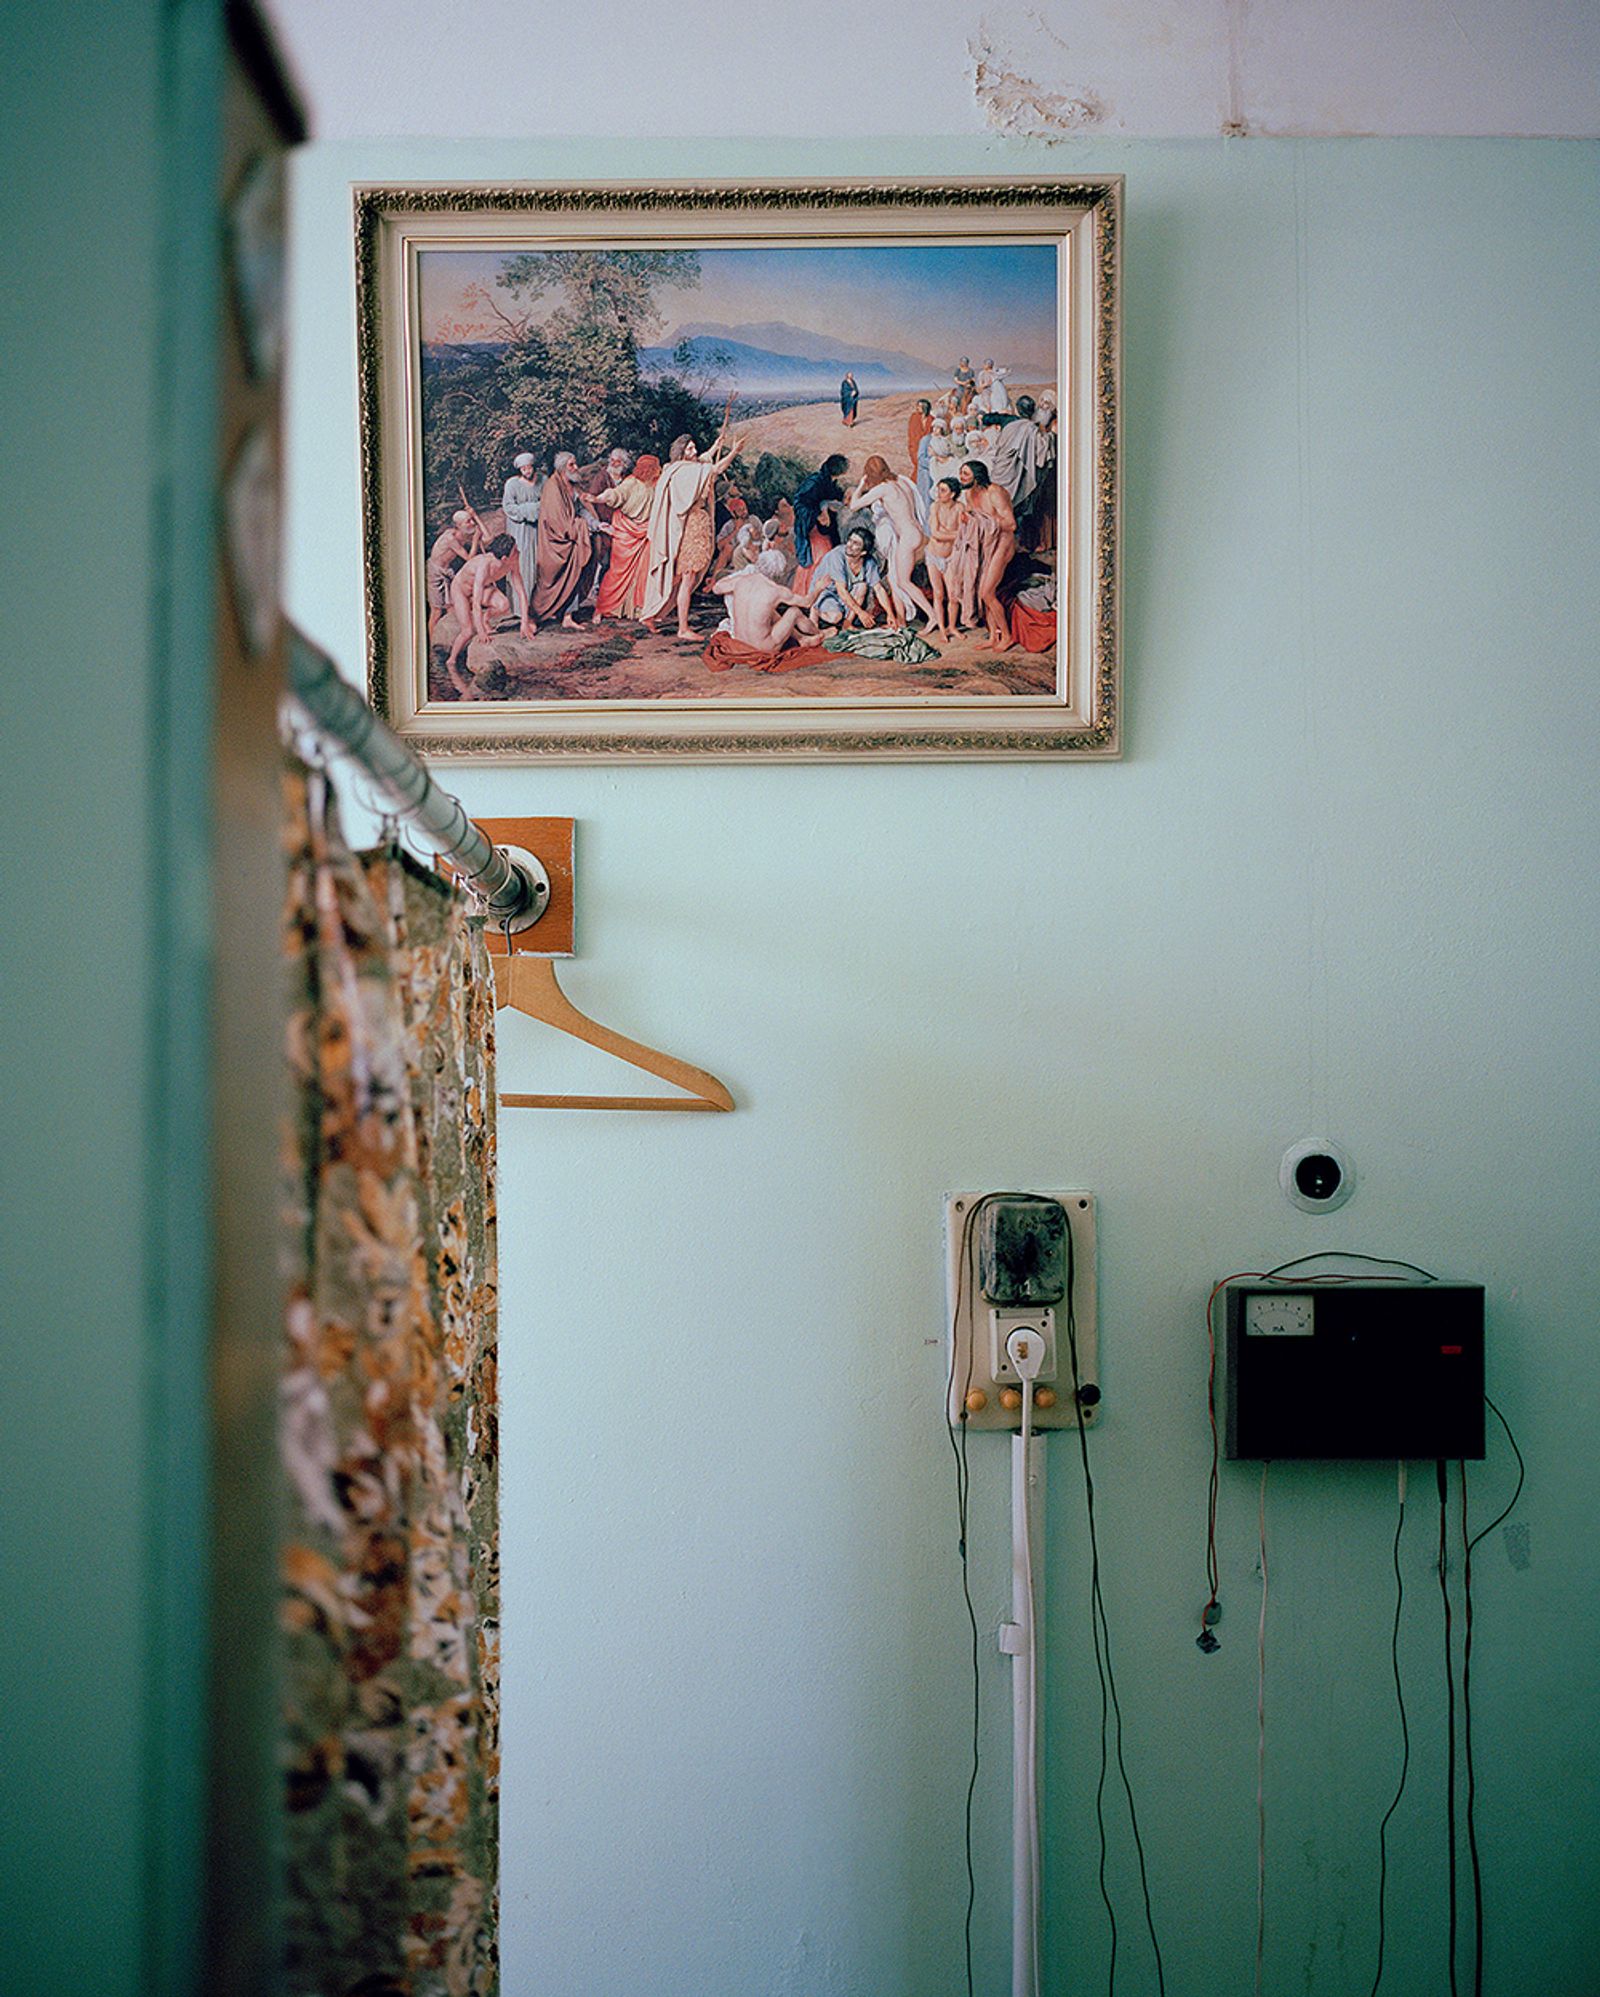 © Michal Solarski - Painting. Physiotherapy room at Mishor sanatorium in Crimea. August 2016, Crimea.